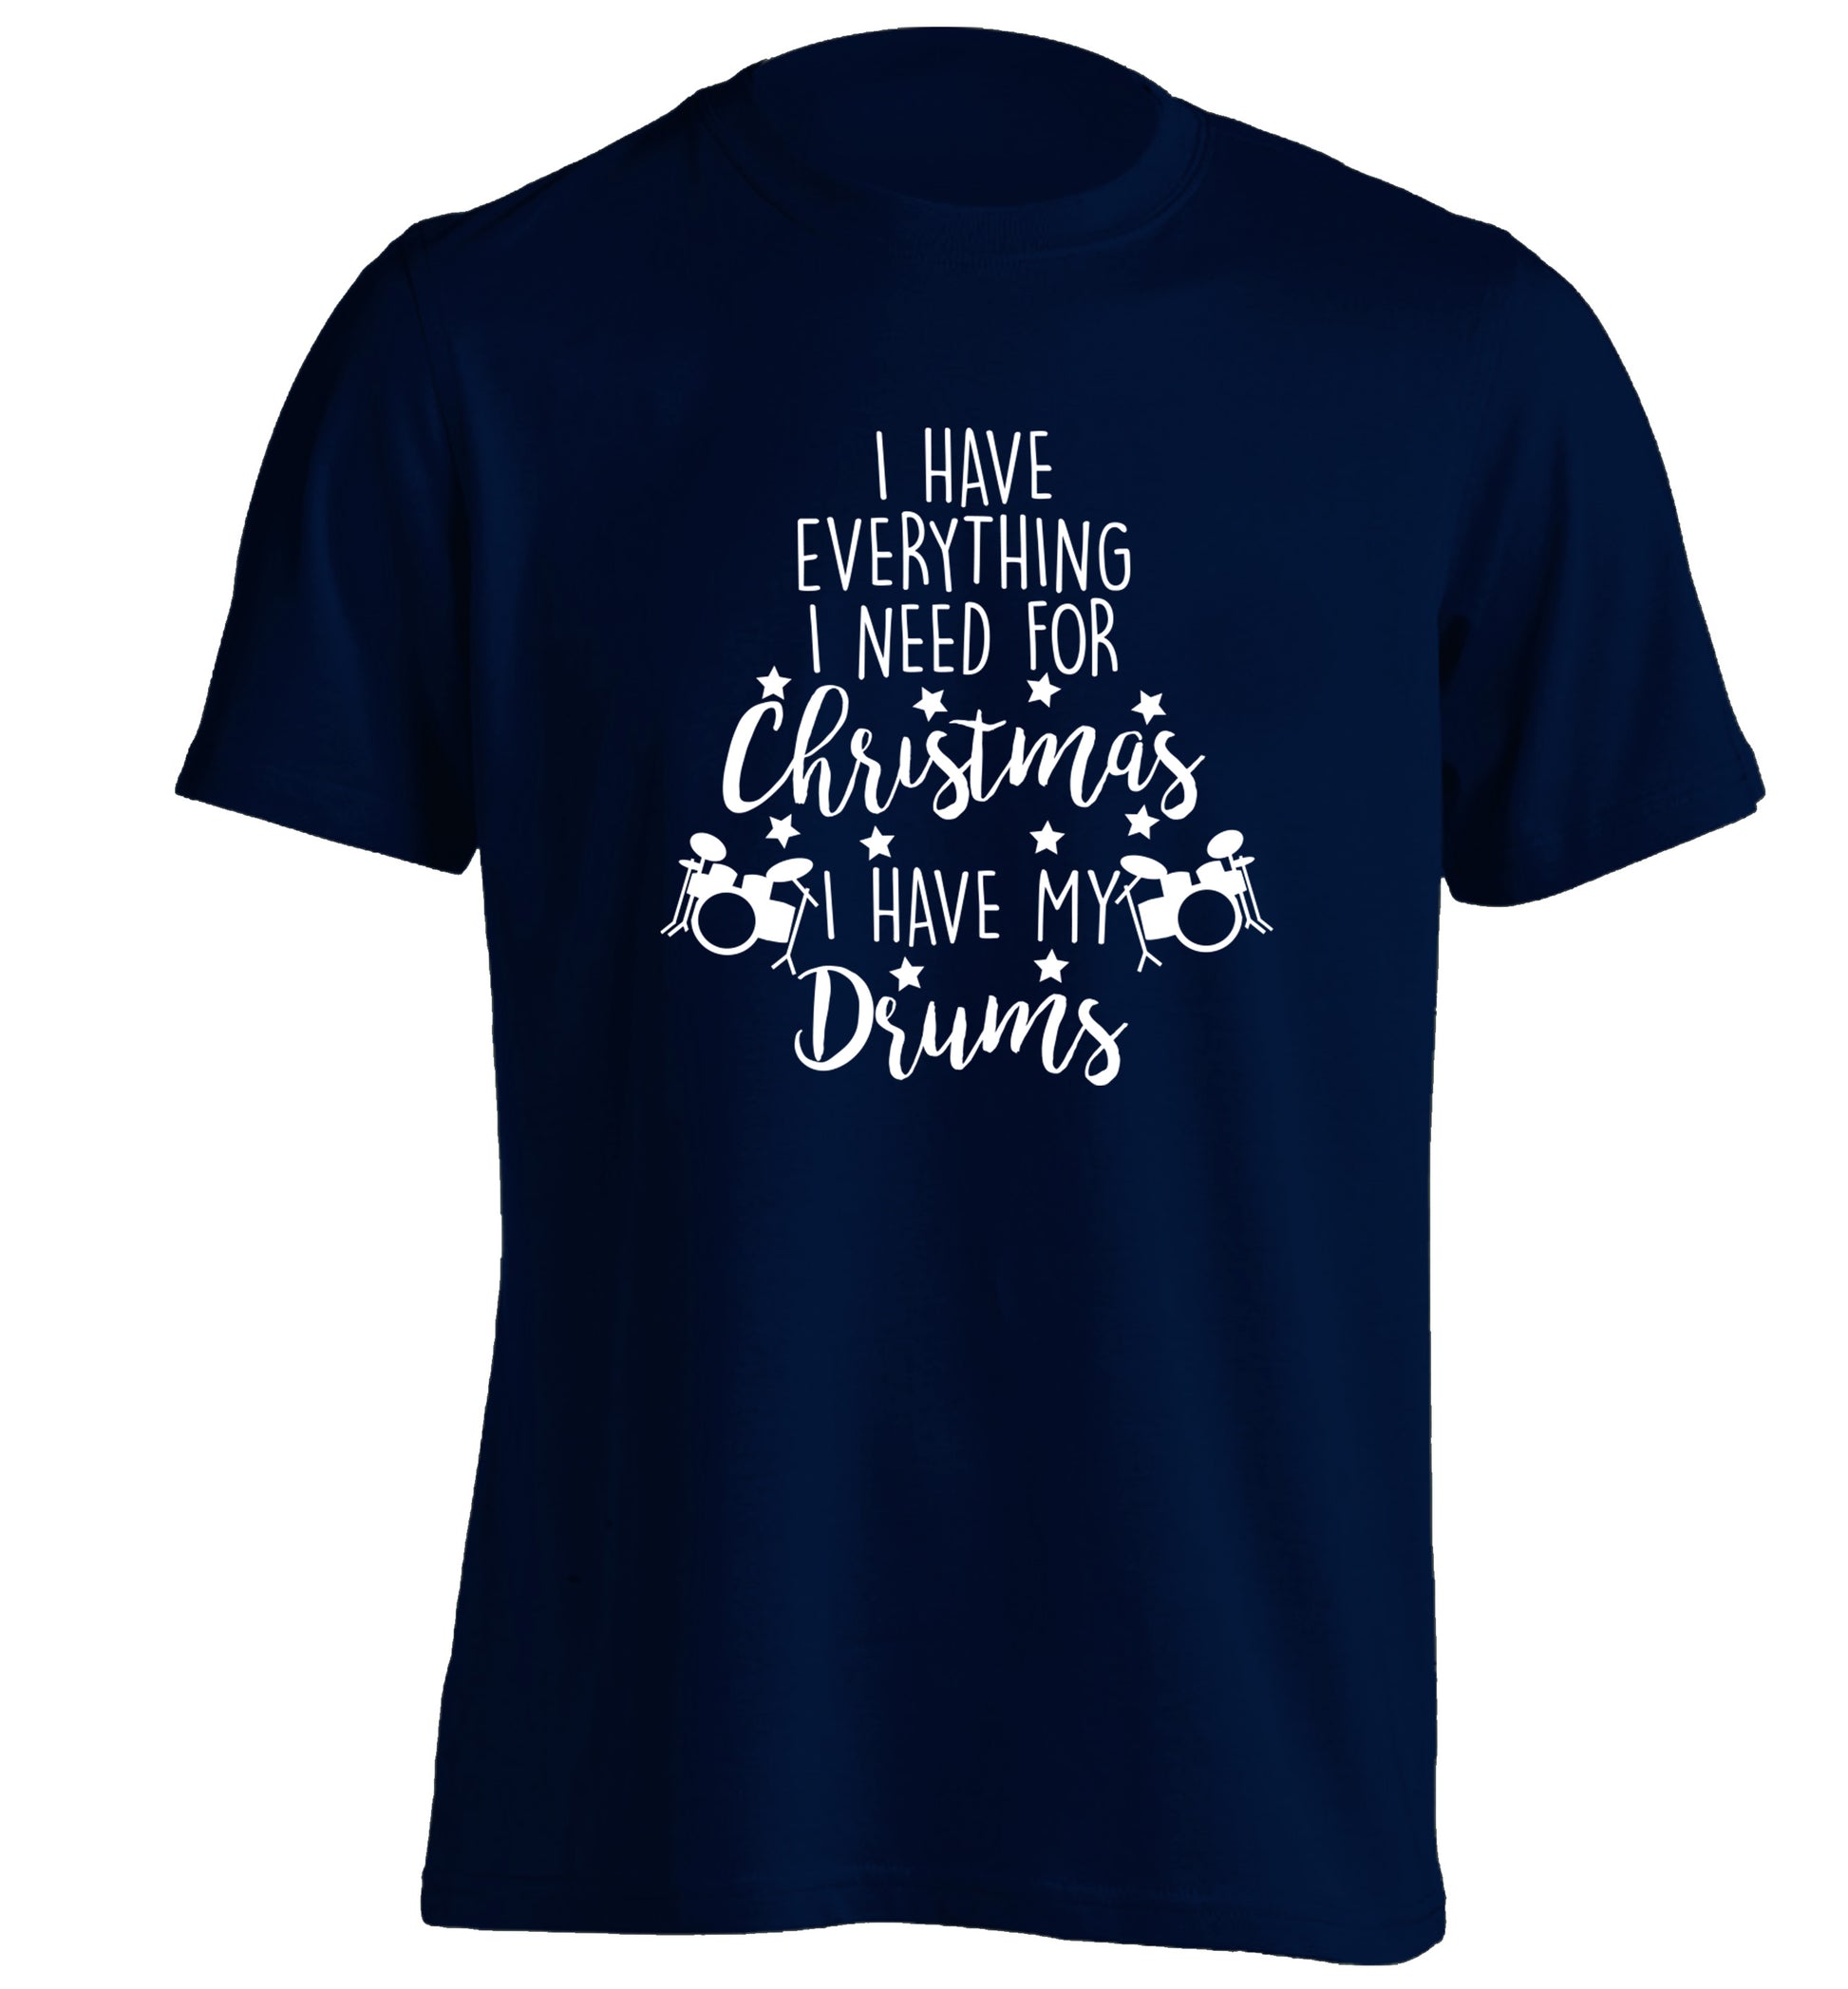 I have everything I need for Christmas I have my drums! adults unisex navy Tshirt 2XL